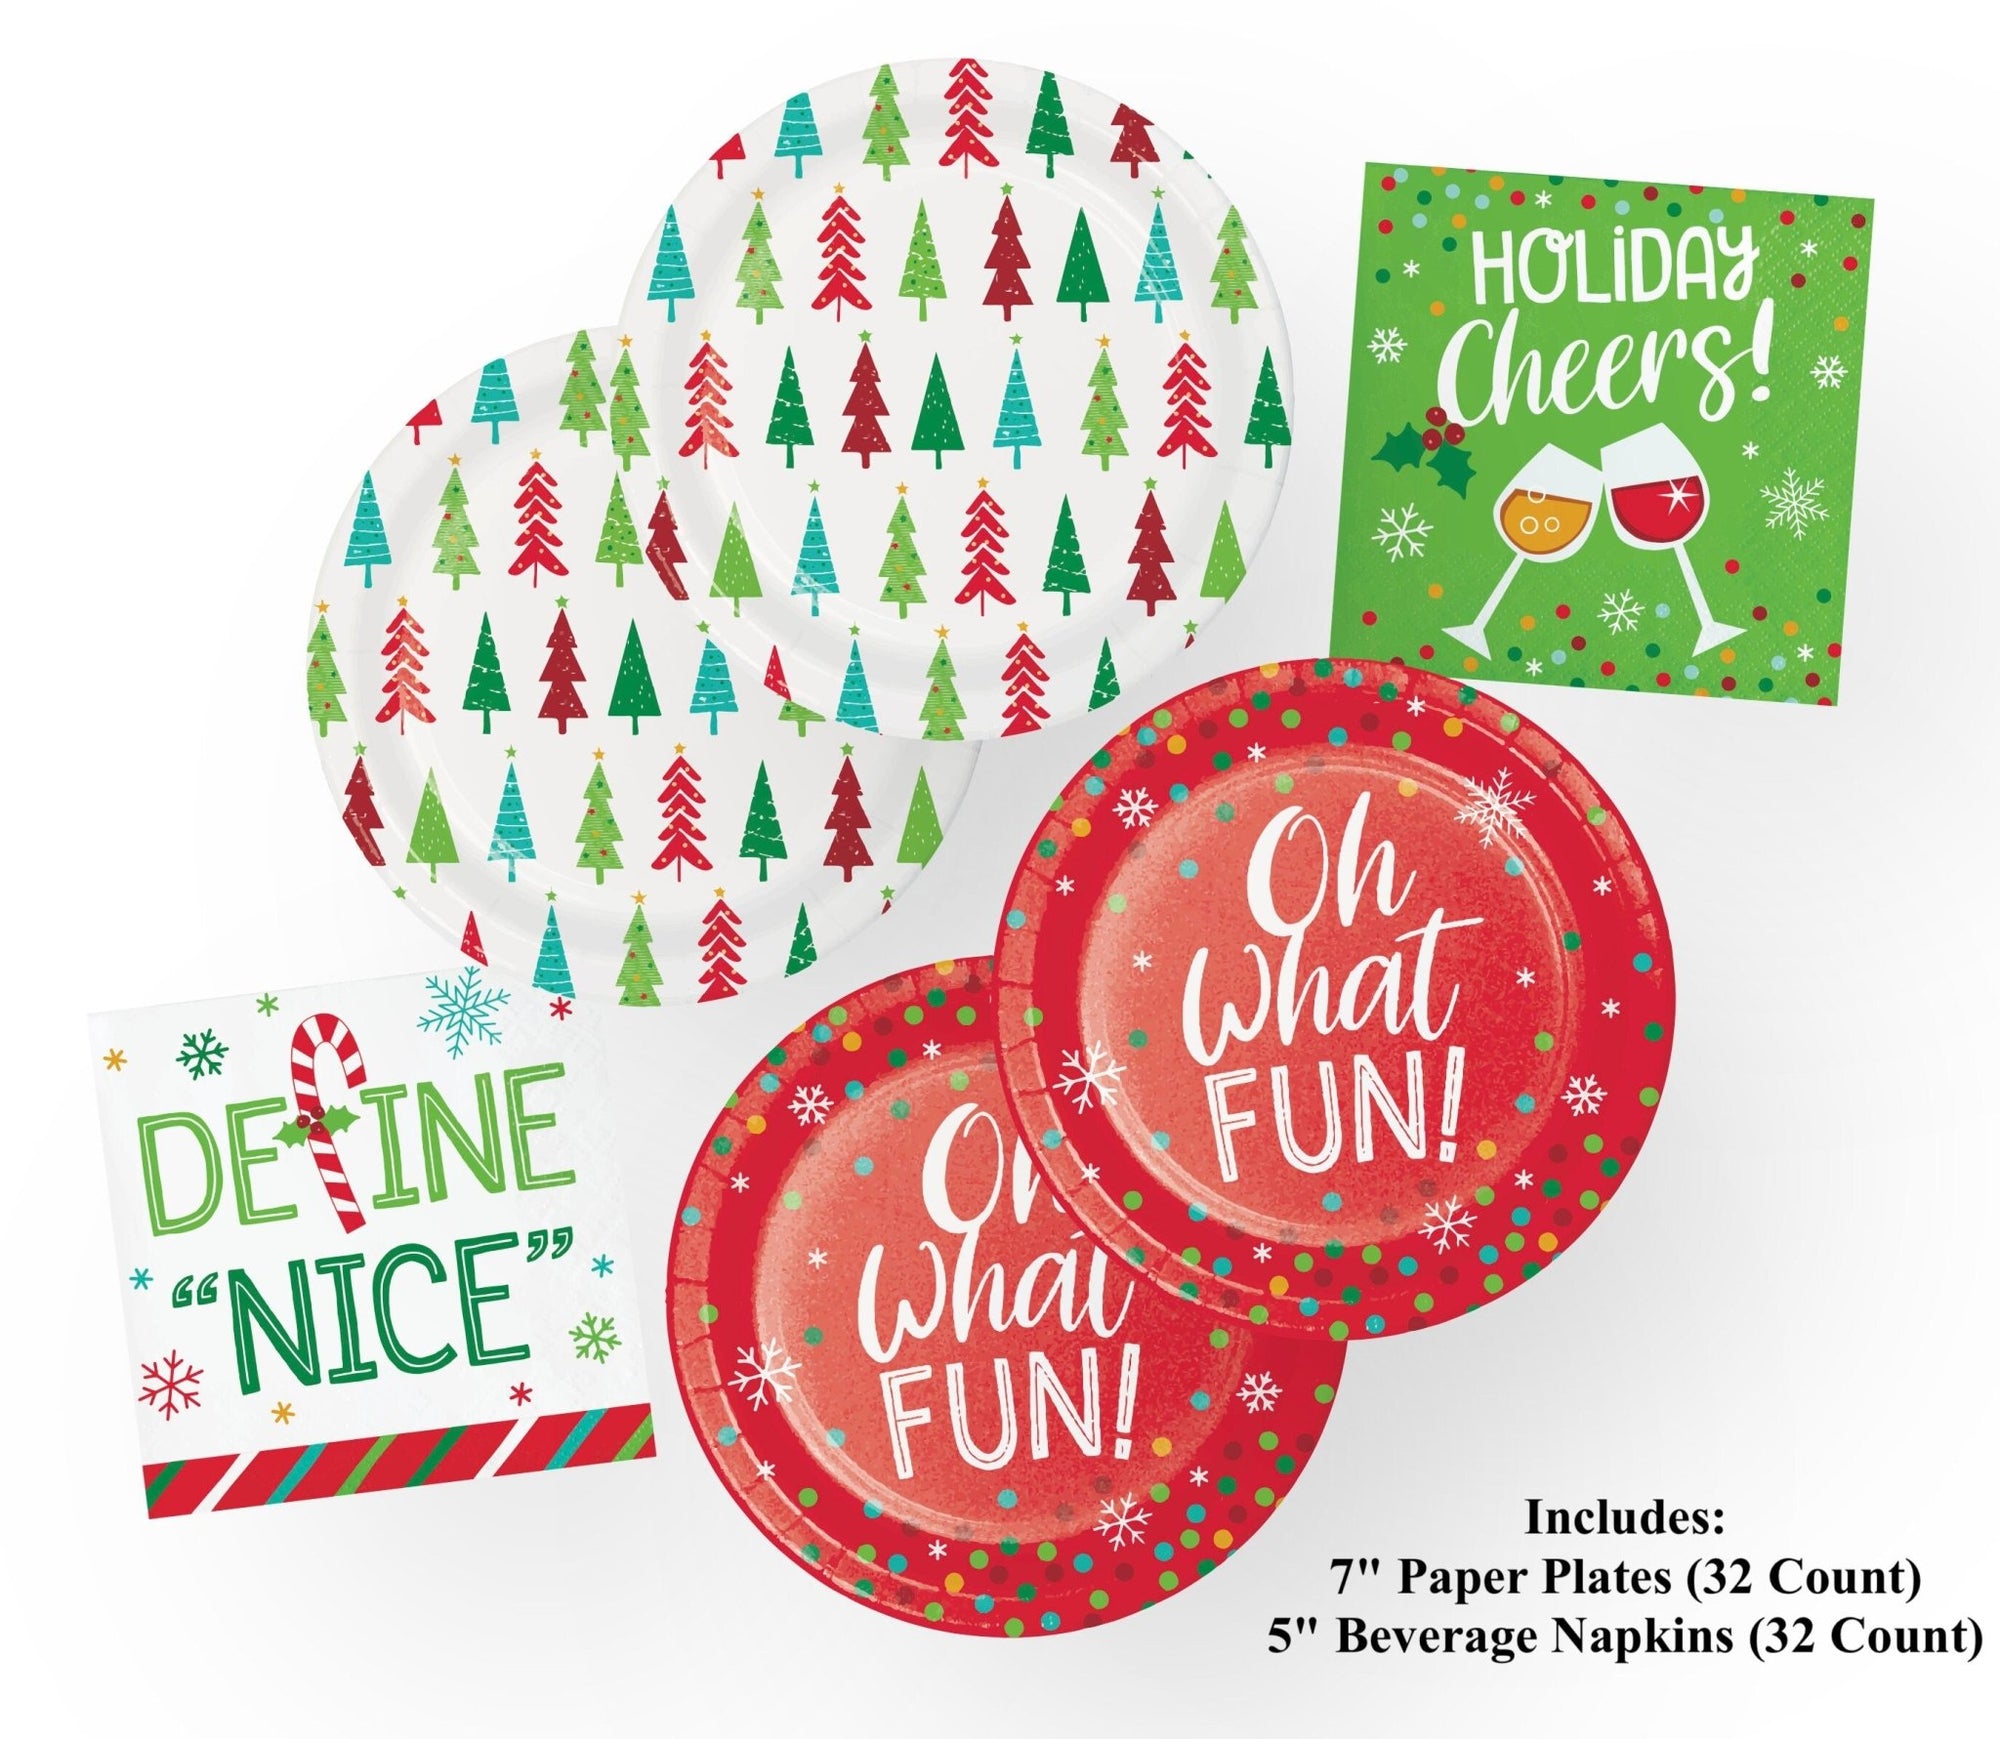 "Define Nice" Adult Holiday Party Supplies - Stesha Party